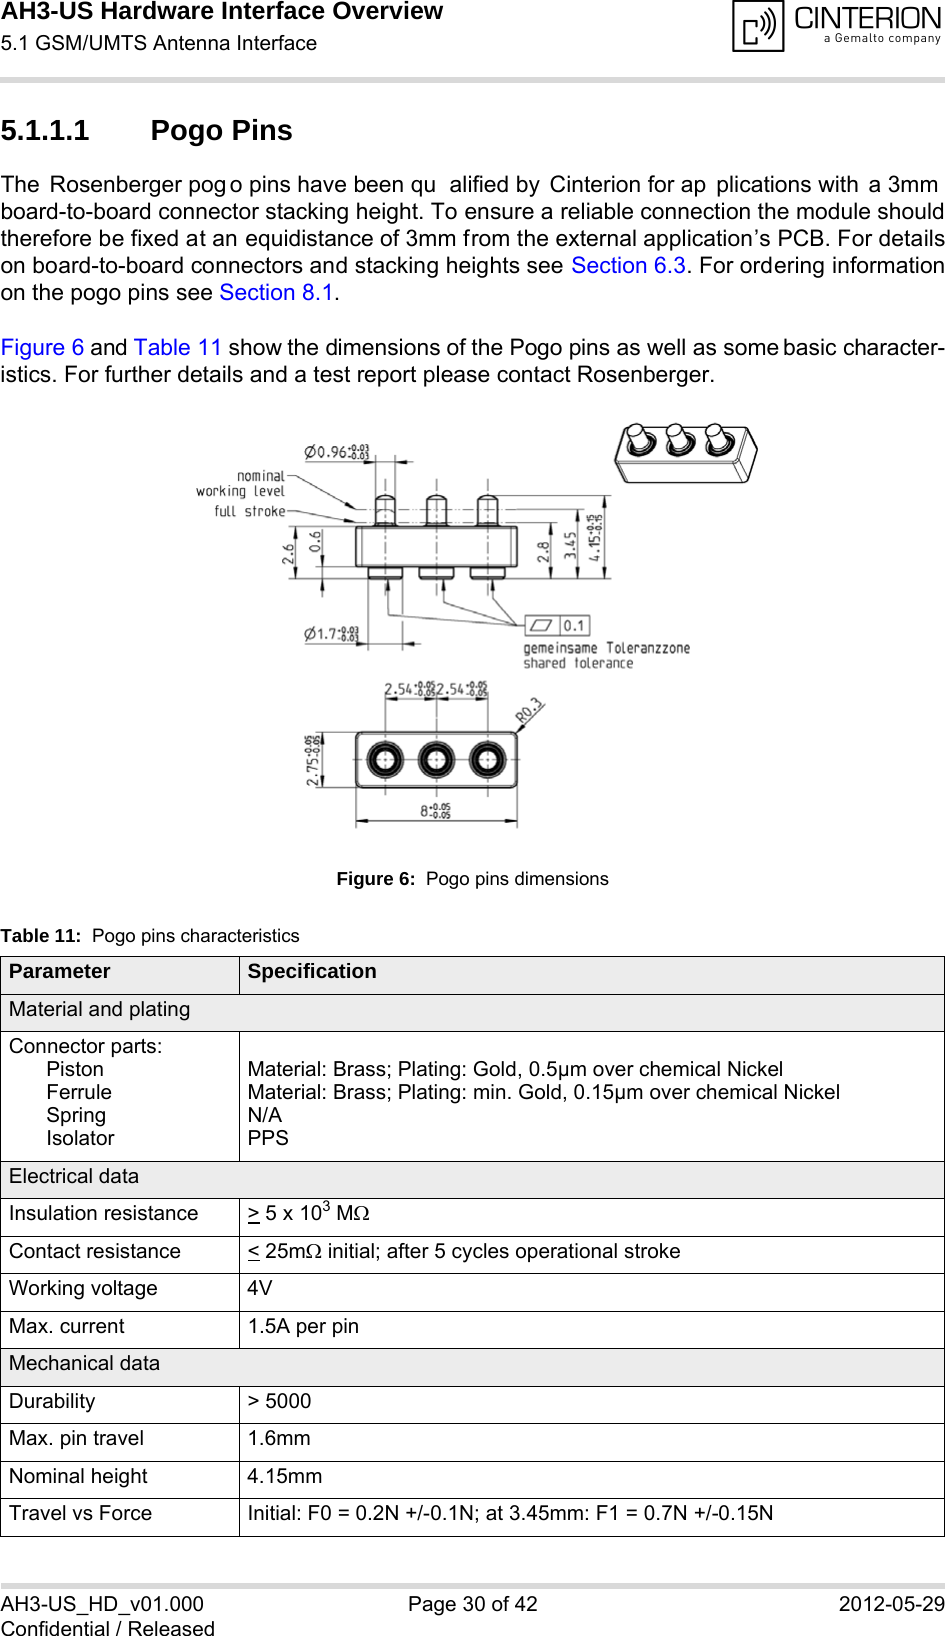 AH3-US Hardware Interface Overview5.1 GSM/UMTS Antenna Interface32AH3-US_HD_v01.000 Page 30 of 42 2012-05-29Confidential / Released5.1.1.1 Pogo PinsThe Rosenberger pog o pins have been qu alified by  Cinterion for ap plications with  a 3mmboard-to-board connector stacking height. To ensure a reliable connection the module shouldtherefore be fixed at an equidistance of 3mm from the external application’s PCB. For detailson board-to-board connectors and stacking heights see Section 6.3. For ordering informationon the pogo pins see Section 8.1. Figure 6 and Table 11 show the dimensions of the Pogo pins as well as some basic character-istics. For further details and a test report please contact Rosenberger.Figure 6:  Pogo pins dimensionsTable 11:  Pogo pins characteristicsParameter SpecificationMaterial and platingConnector parts:PistonFerruleSpringIsolatorMaterial: Brass; Plating: Gold, 0.5µm over chemical NickelMaterial: Brass; Plating: min. Gold, 0.15µm over chemical NickelN/APPSElectrical dataInsulation resistance &gt; 5 x 103 MContact resistance &lt; 25m initial; after 5 cycles operational strokeWorking voltage 4VMax. current 1.5A per pinMechanical dataDurability &gt; 5000Max. pin travel 1.6mmNominal height 4.15mmTravel vs Force Initial: F0 = 0.2N +/-0.1N; at 3.45mm: F1 = 0.7N +/-0.15N 